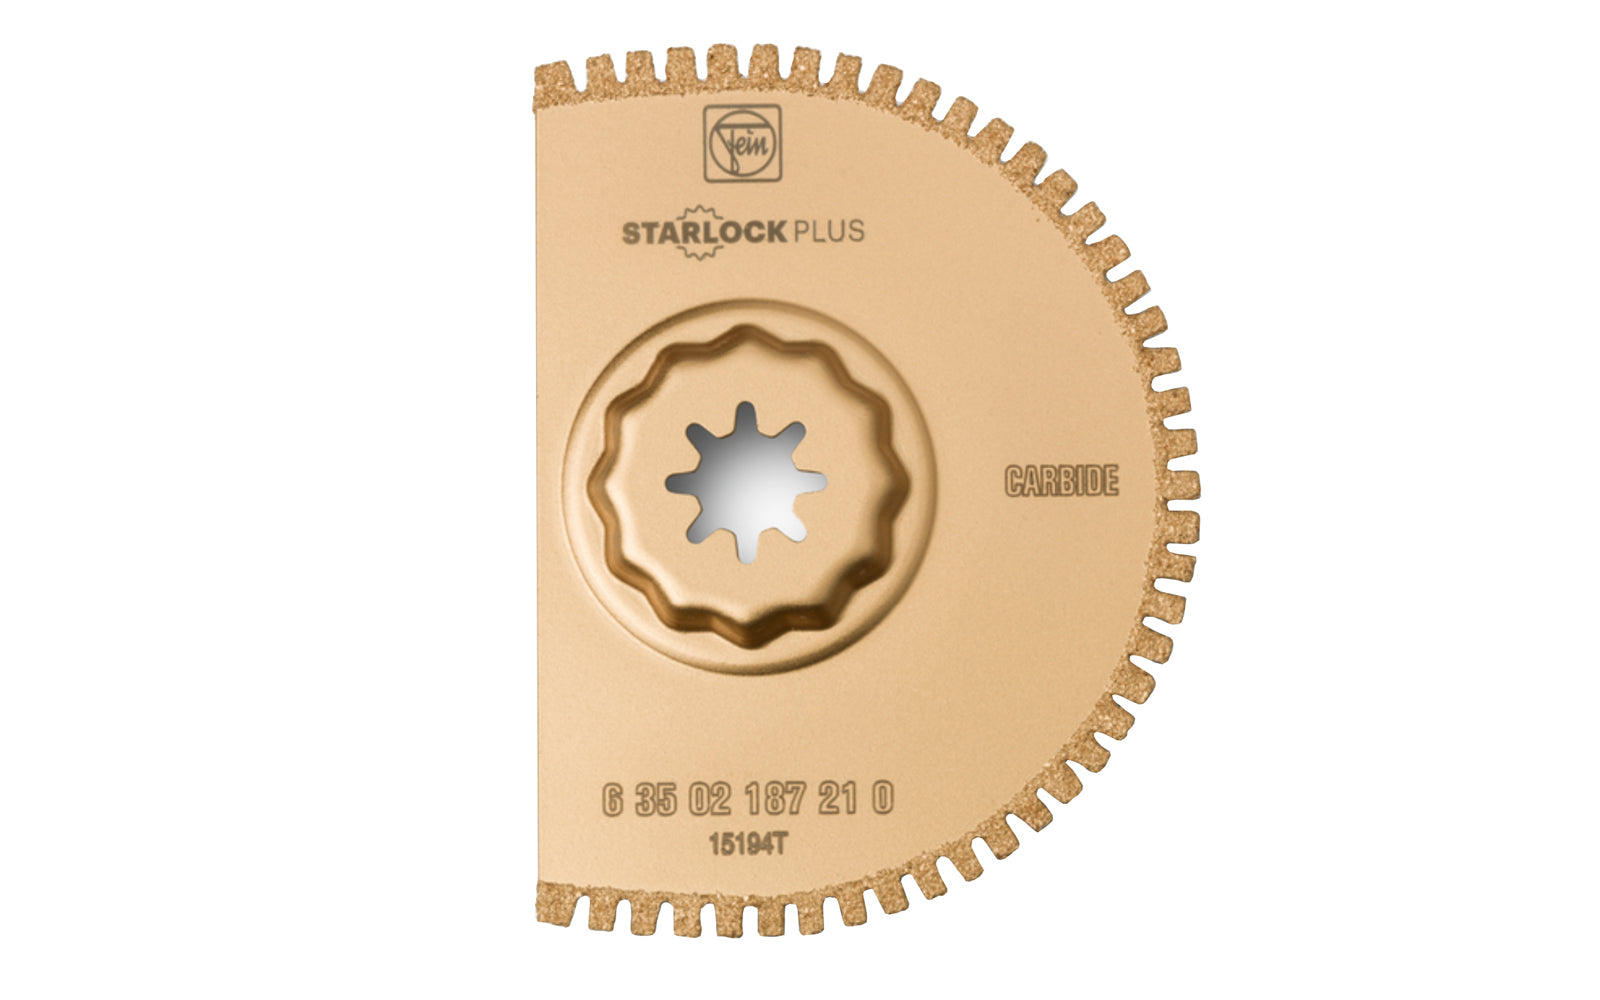 Fein Tools 3-9/16" Segment Carbide Open Teeth Saw Blade - 187 Blade. Open teeth for perfect, clean cut edges without delamination in CFRP/fiberglass materials. Very high cutting speed & precision. 4014586390659. Thin blade version. Kerf approx. 3/64" (1.2 mm). 63502187210. Segmented Carbide Blade. Extra Thin Kerf